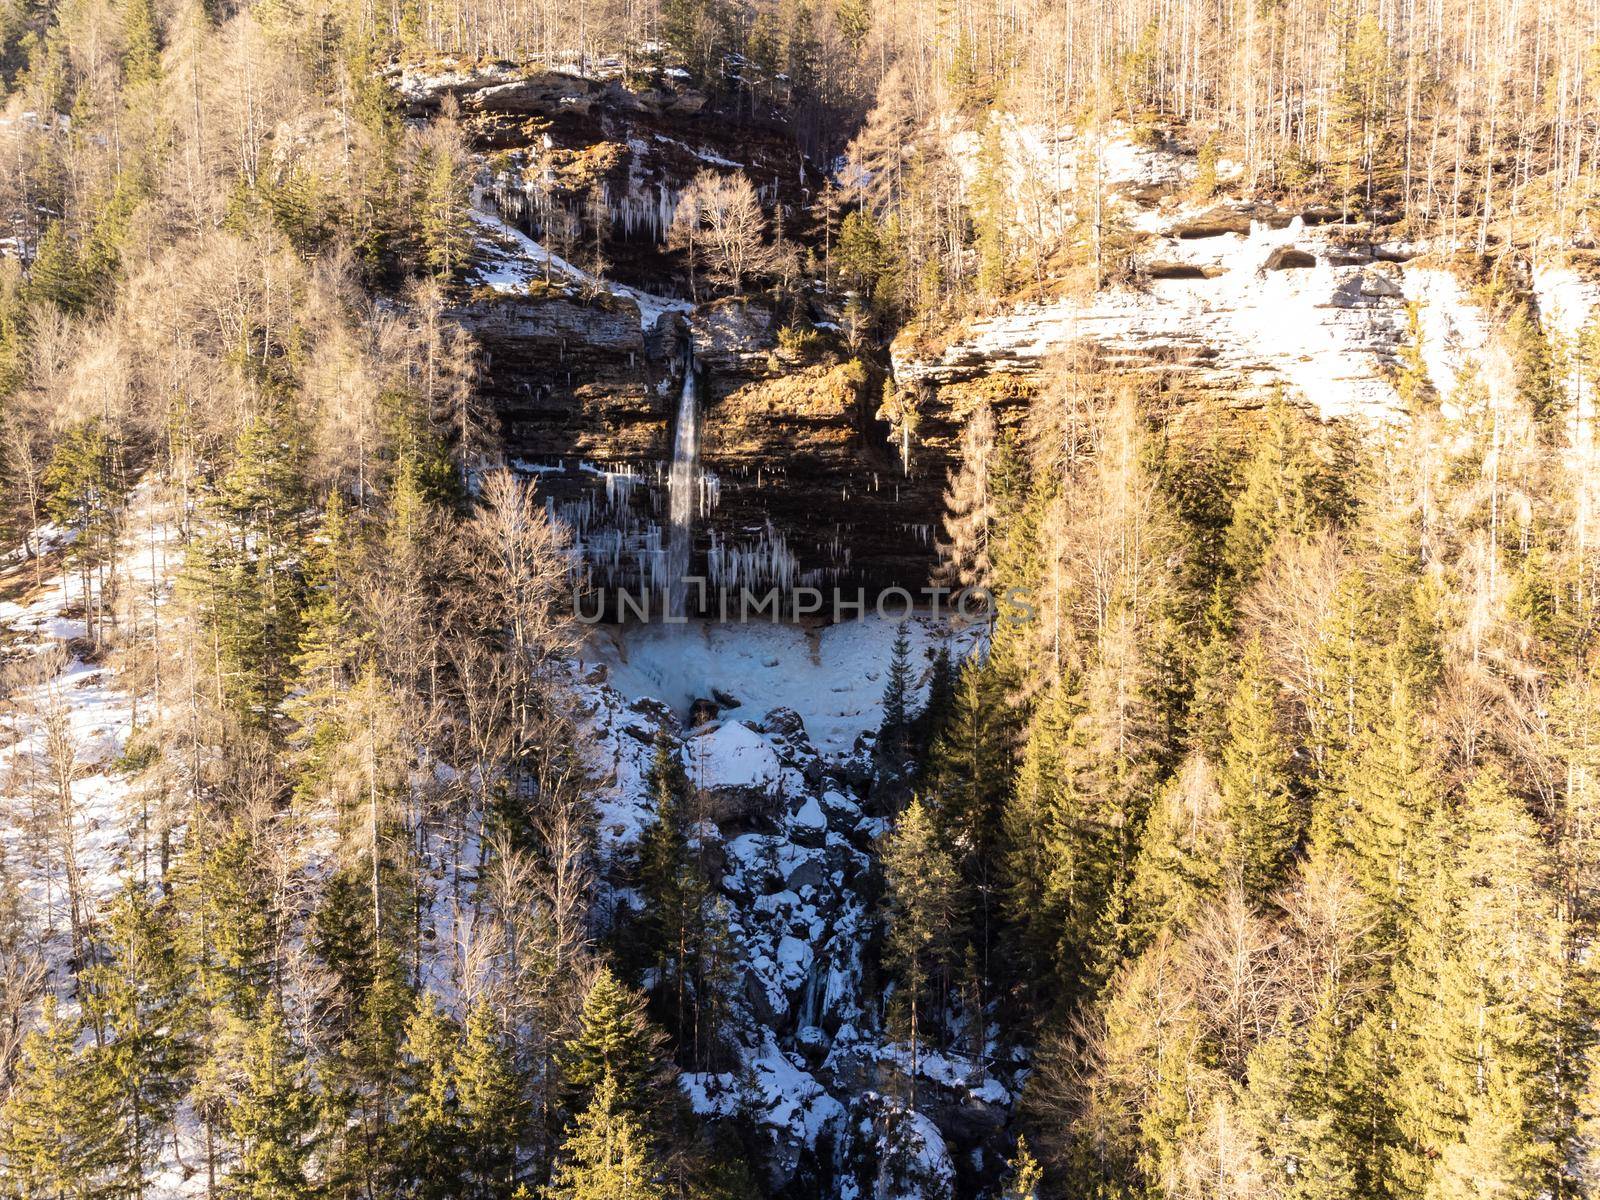 Aerial view of Pericnik slap or Pericnik Waterfall in winter time, Triglav National Park, Slovenia. Upper and lower waterfalls cascading over a rocky cliff, reachable by a picturesque walking trail. by kasto